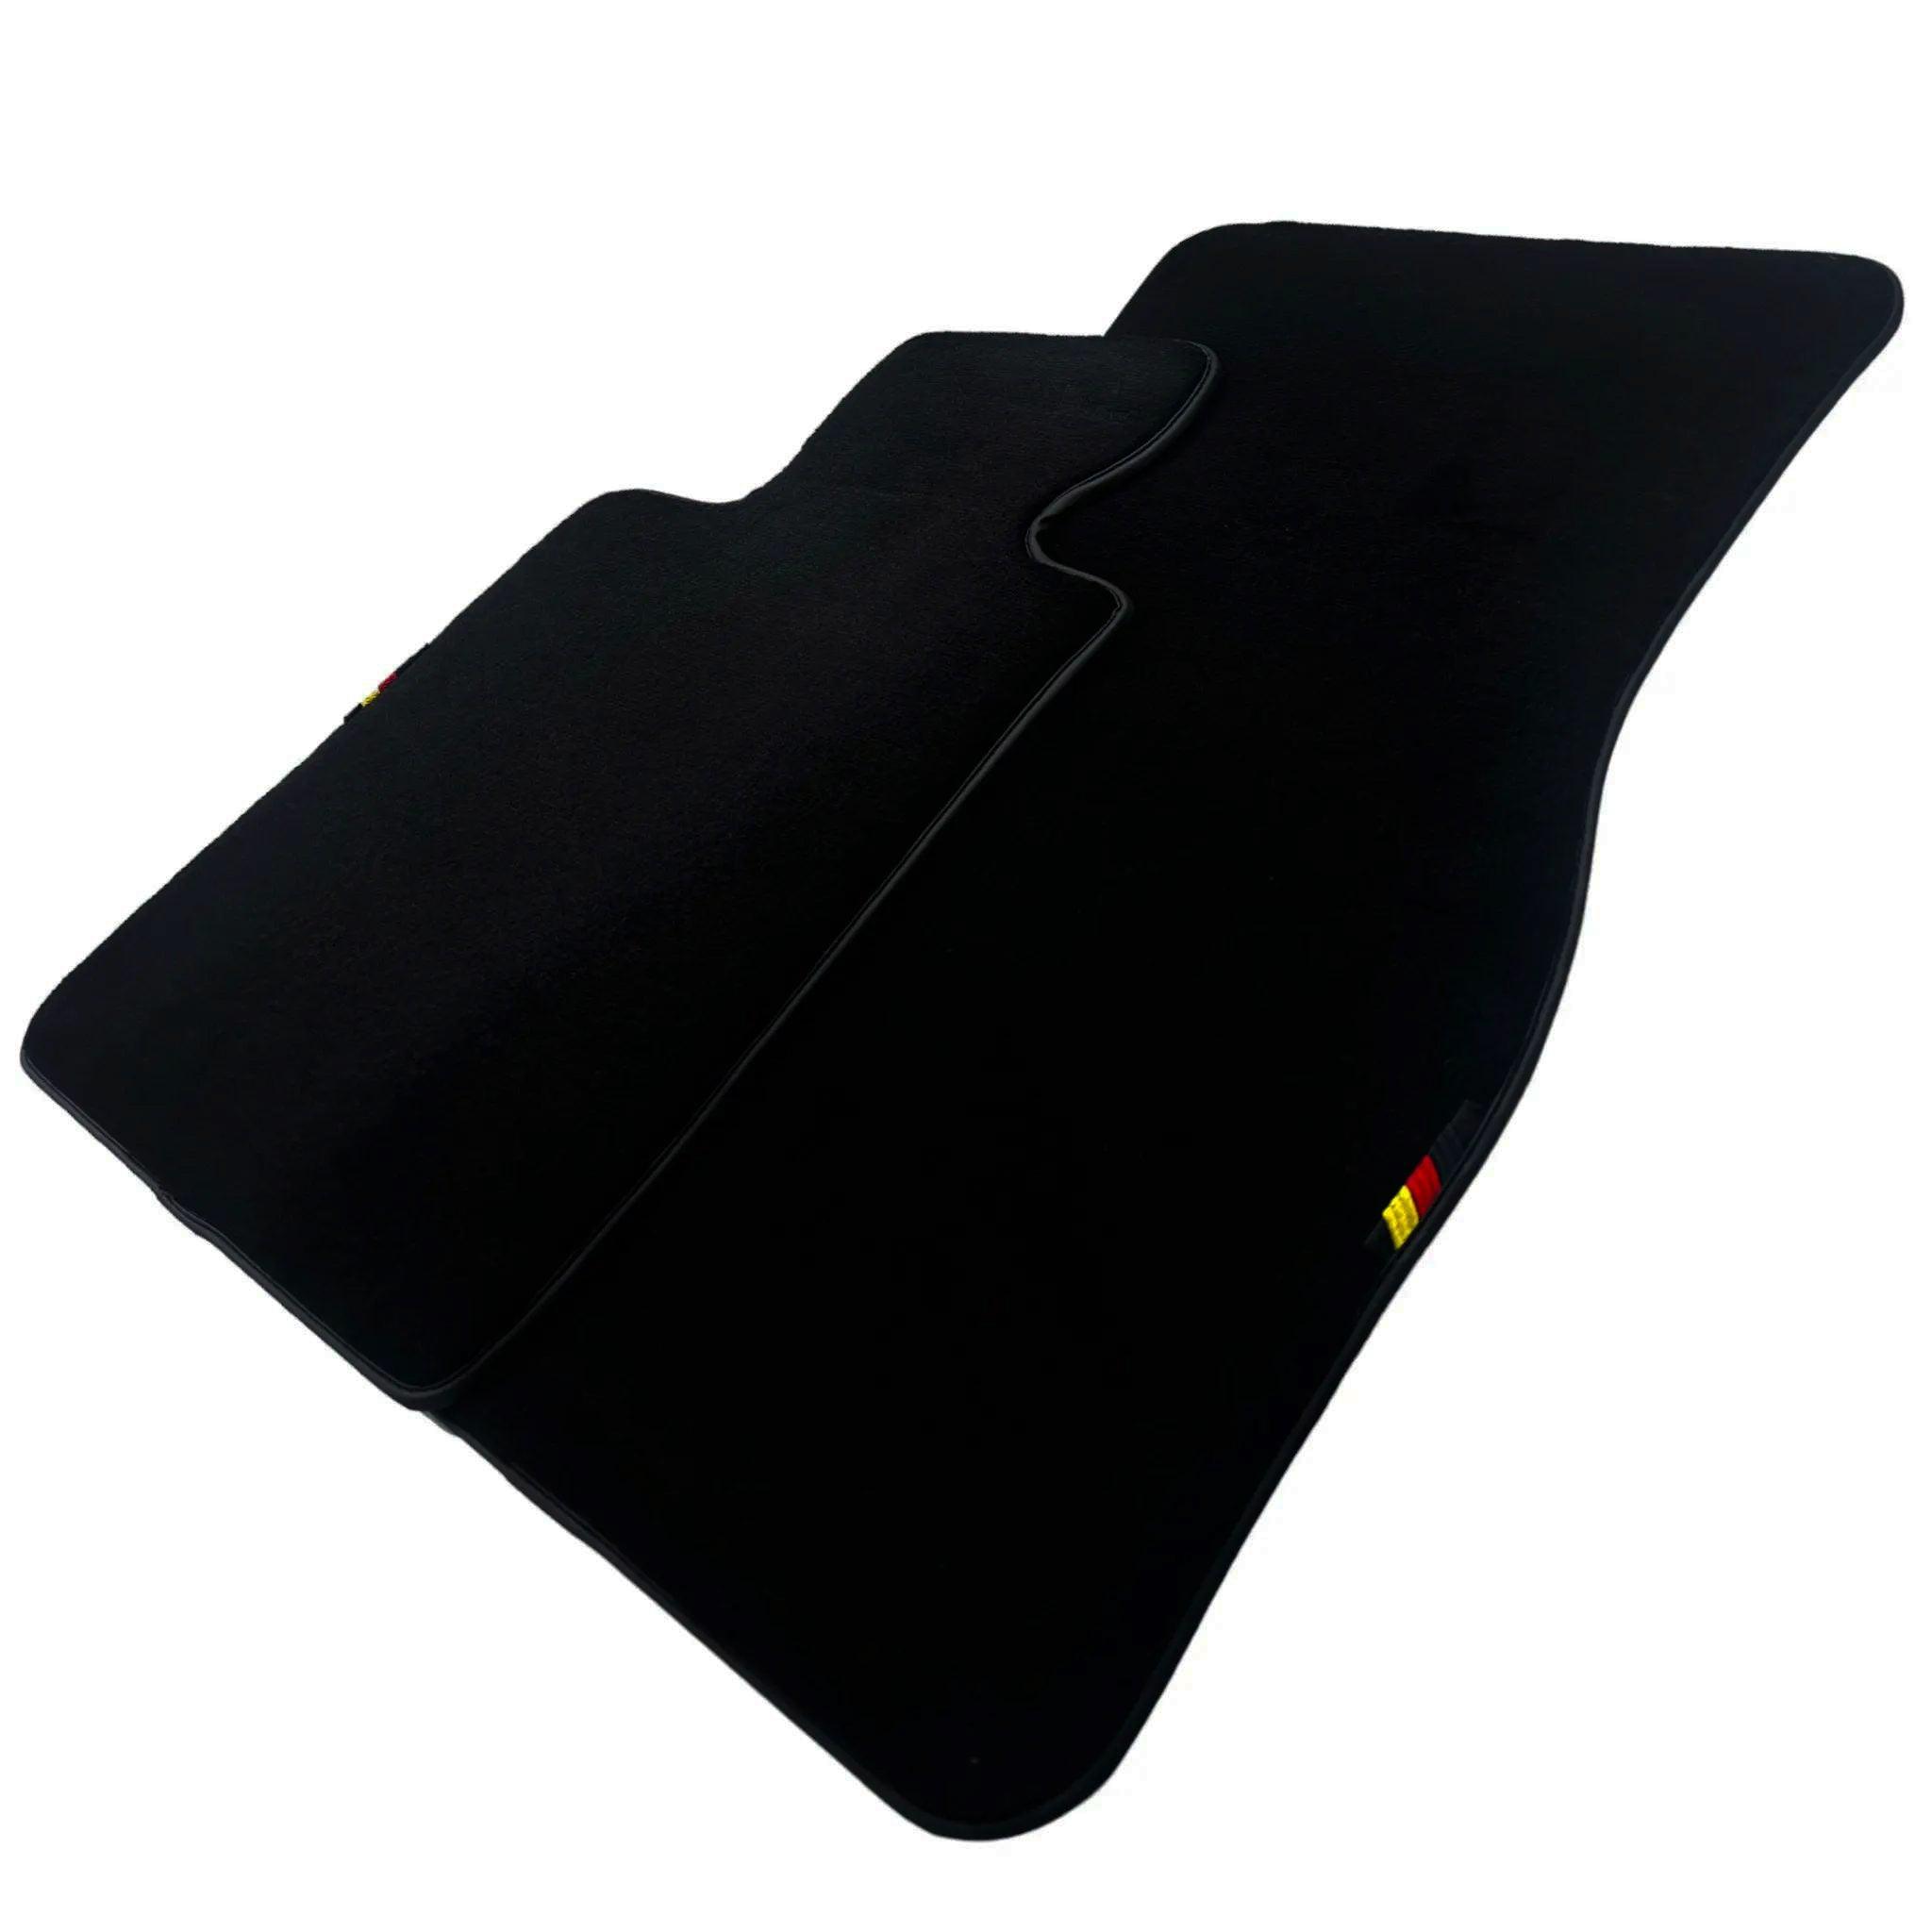 Black Floor Mats For BMW 7 Series E38 Germany Edition